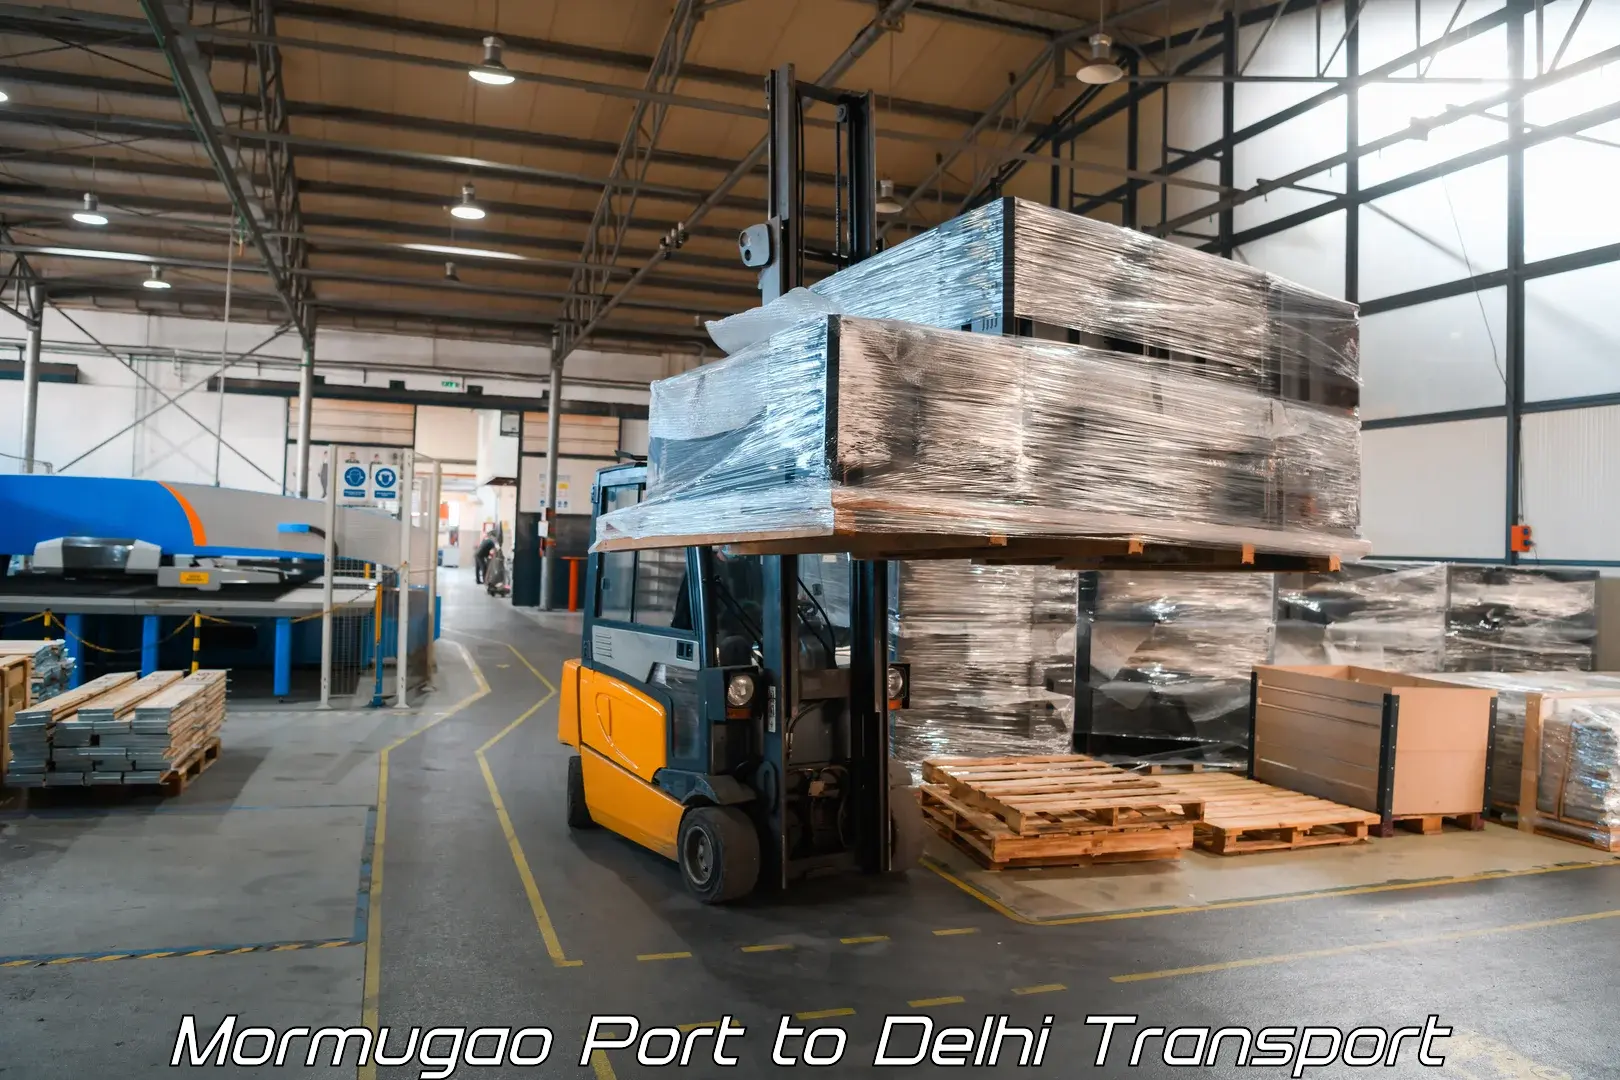 Transport bike from one state to another Mormugao Port to Delhi